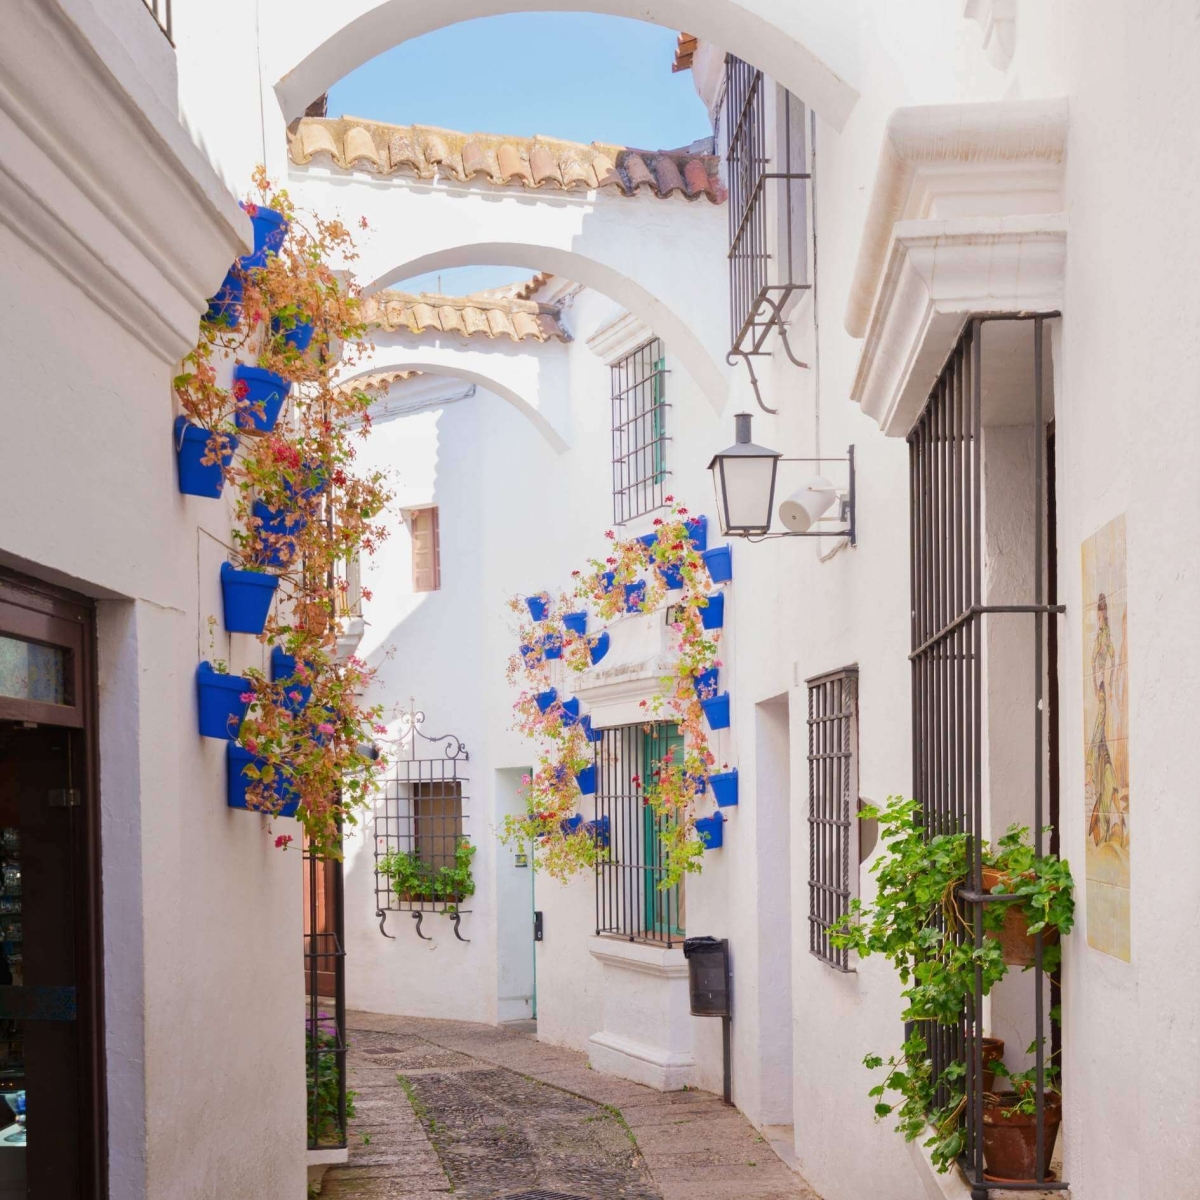 Poble Espanyol street, with traditional for Andalusia white walls, Barcelona, Catalonia, Spain